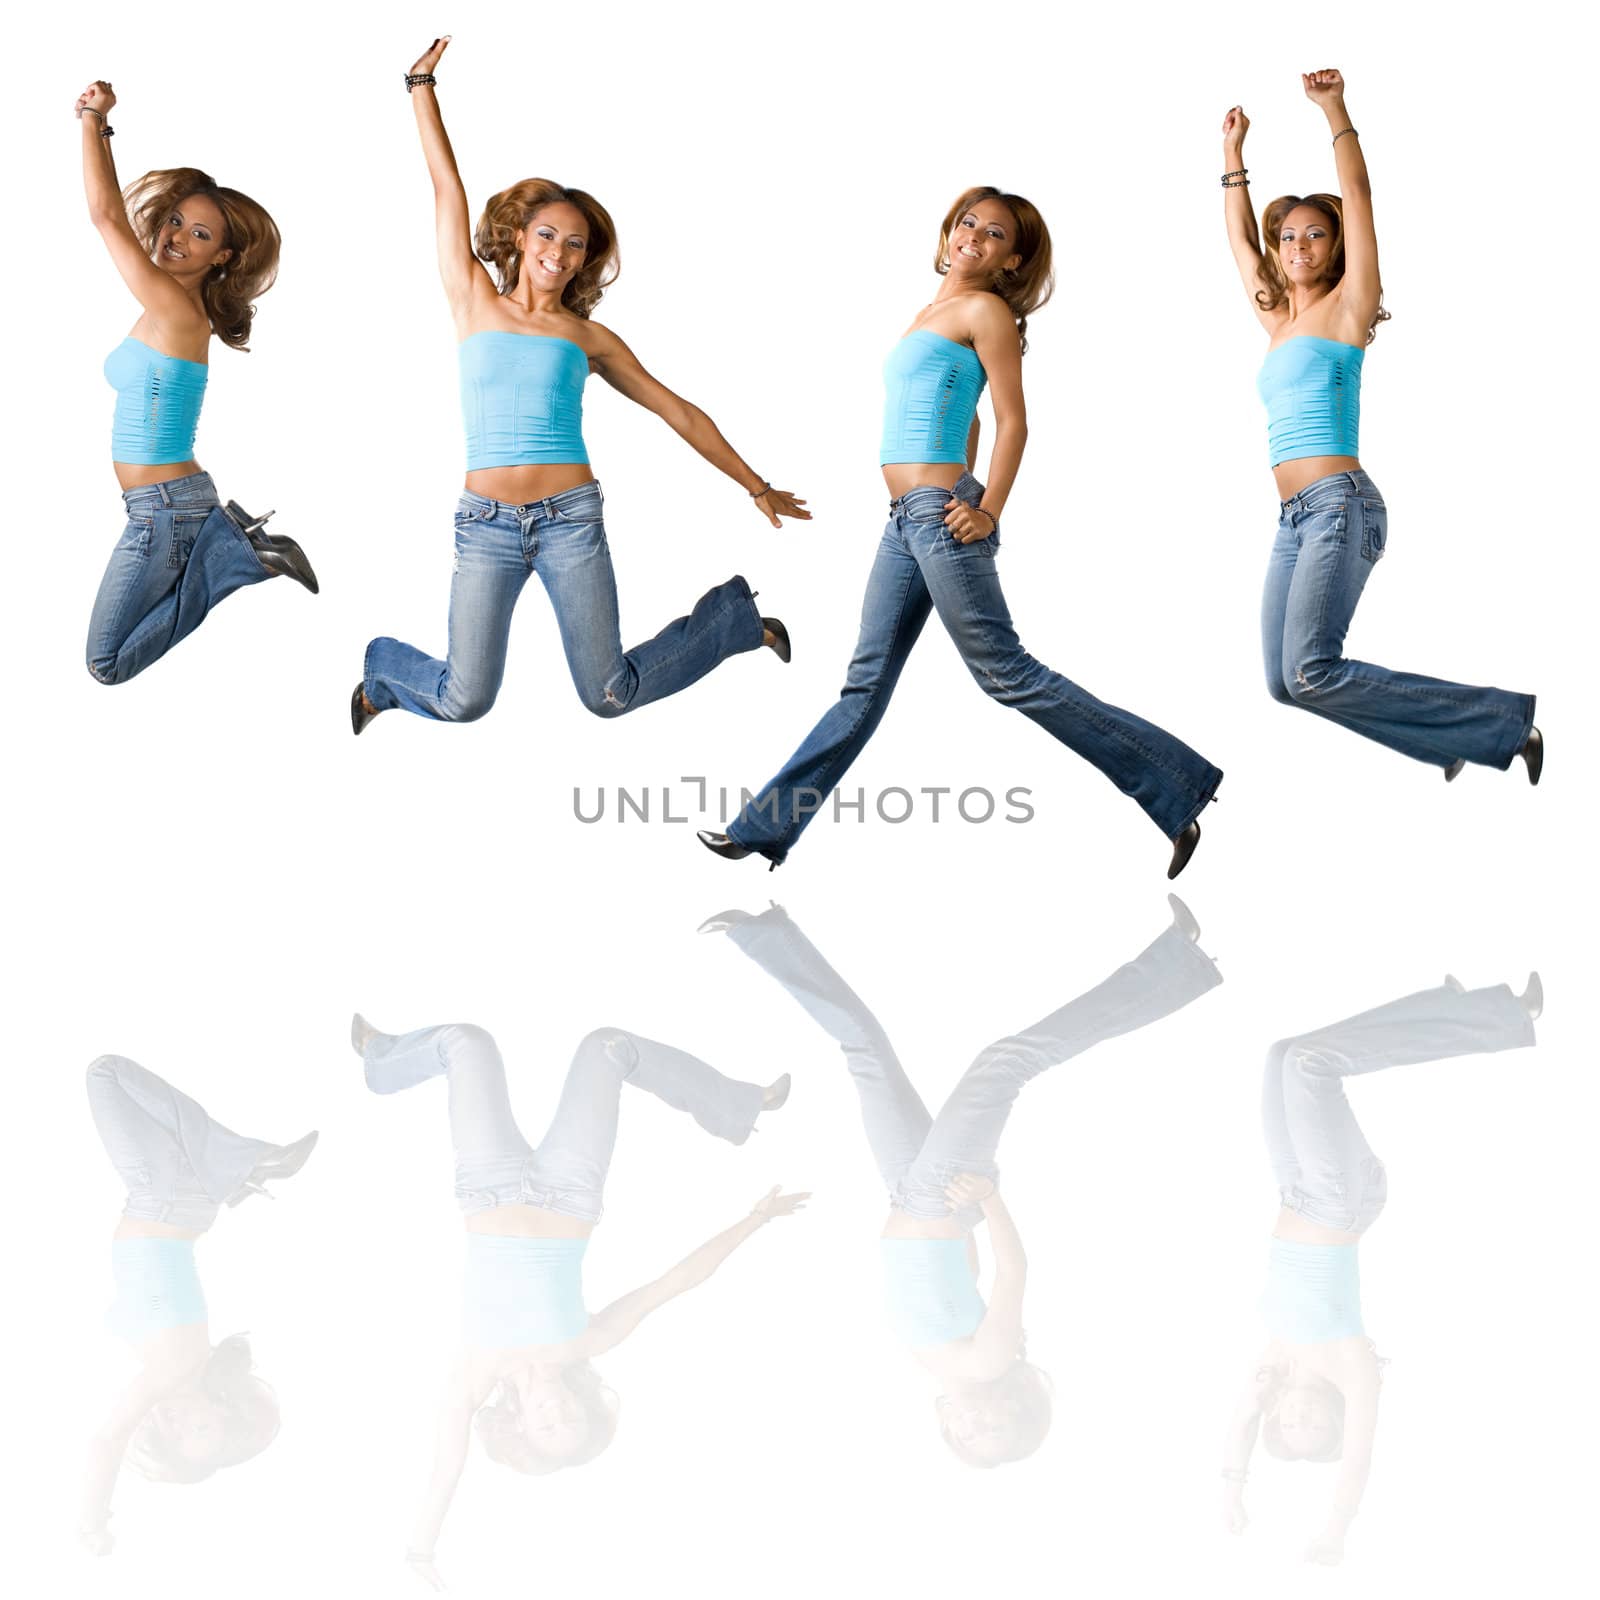 A young Hispanic girl in her early twenties jumping in the air in four different poses with reflections over white.